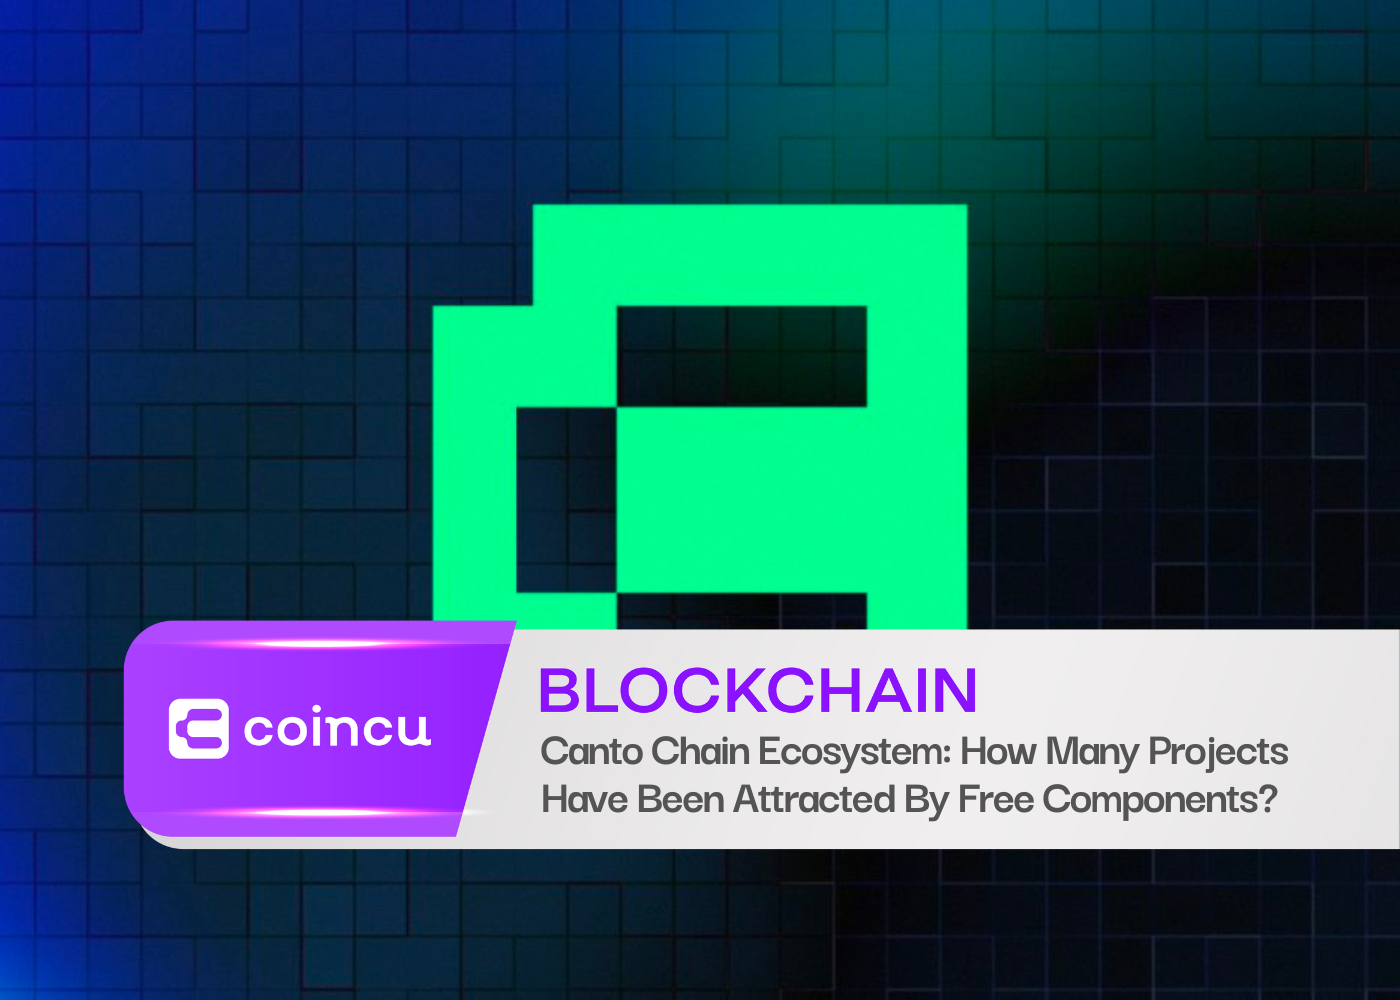 Canto Chain Ecosystem: How Many Projects Have Been Attracted By Free Components?